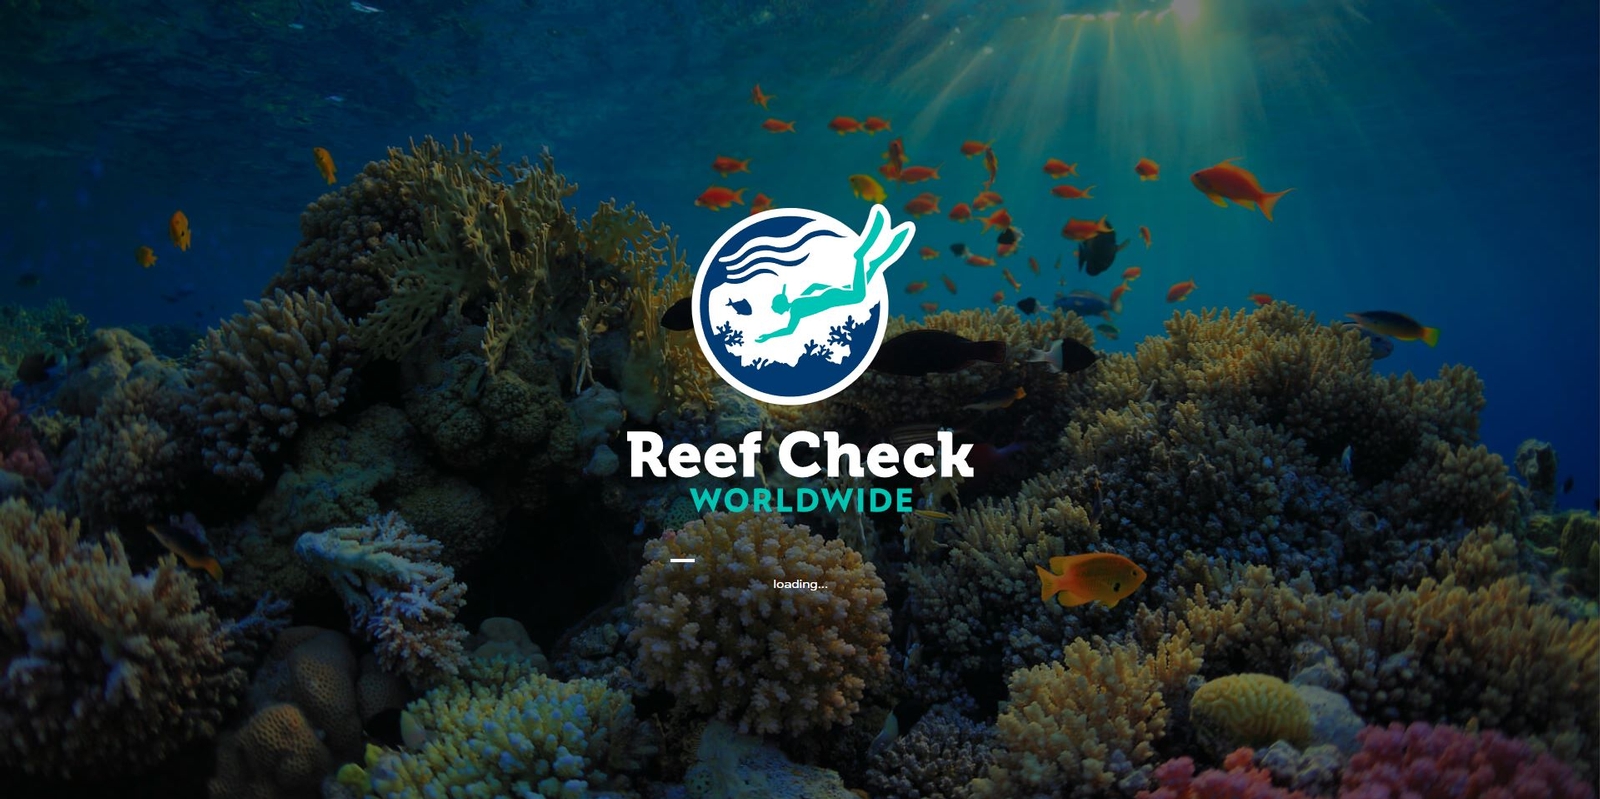 REEF CHECK